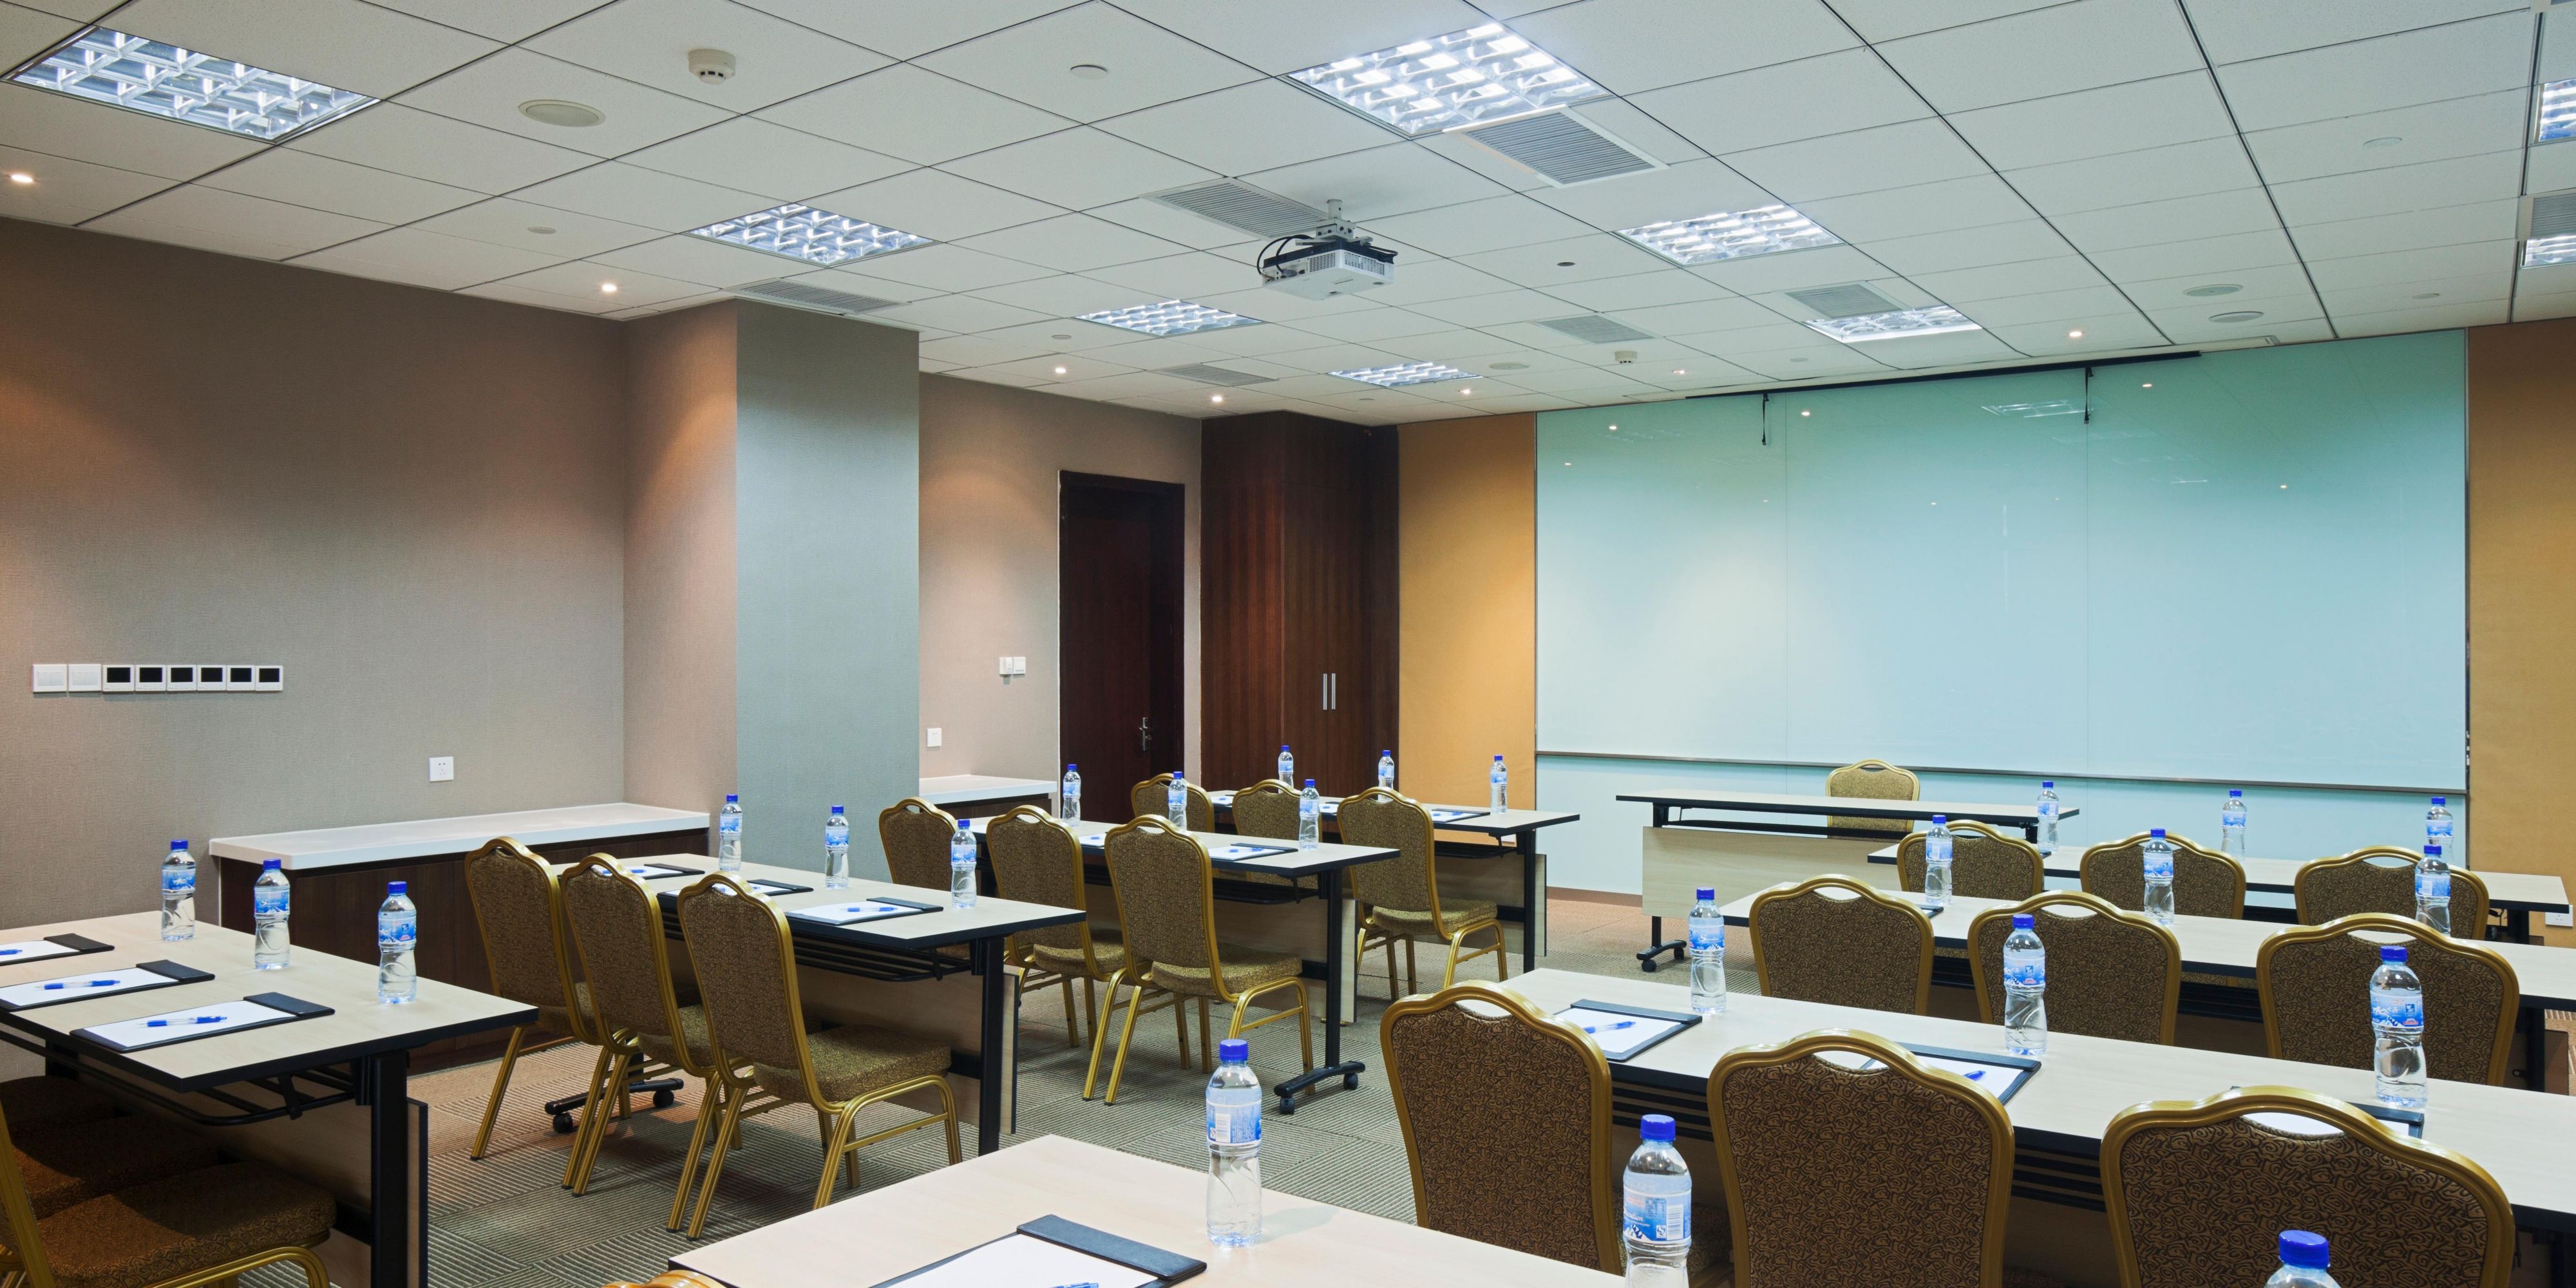 The hotel has two meeting rooms, which can be used for meetings or meals